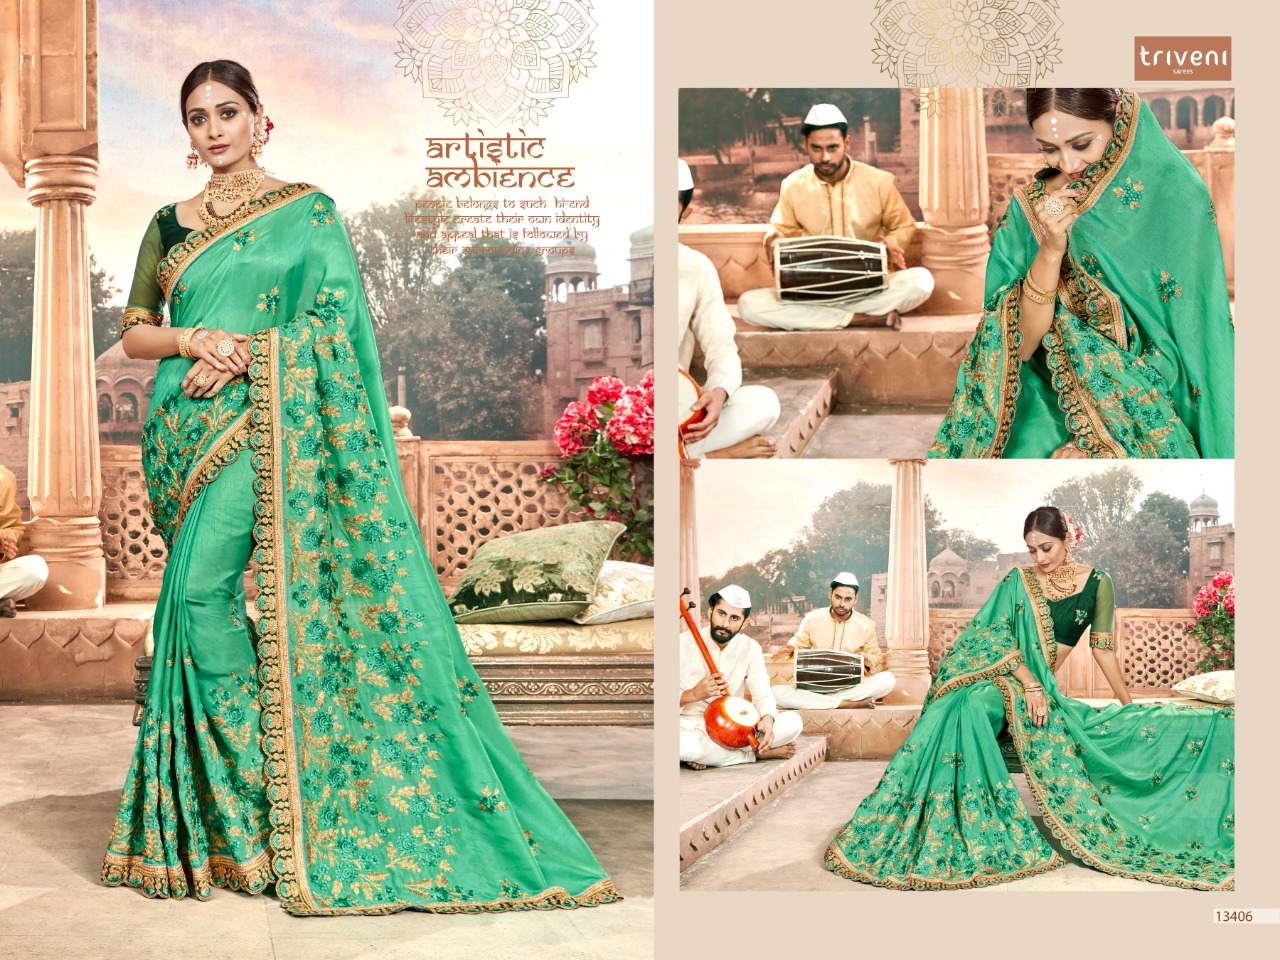 triveni new jubilee colorful beautiful collection of sarees